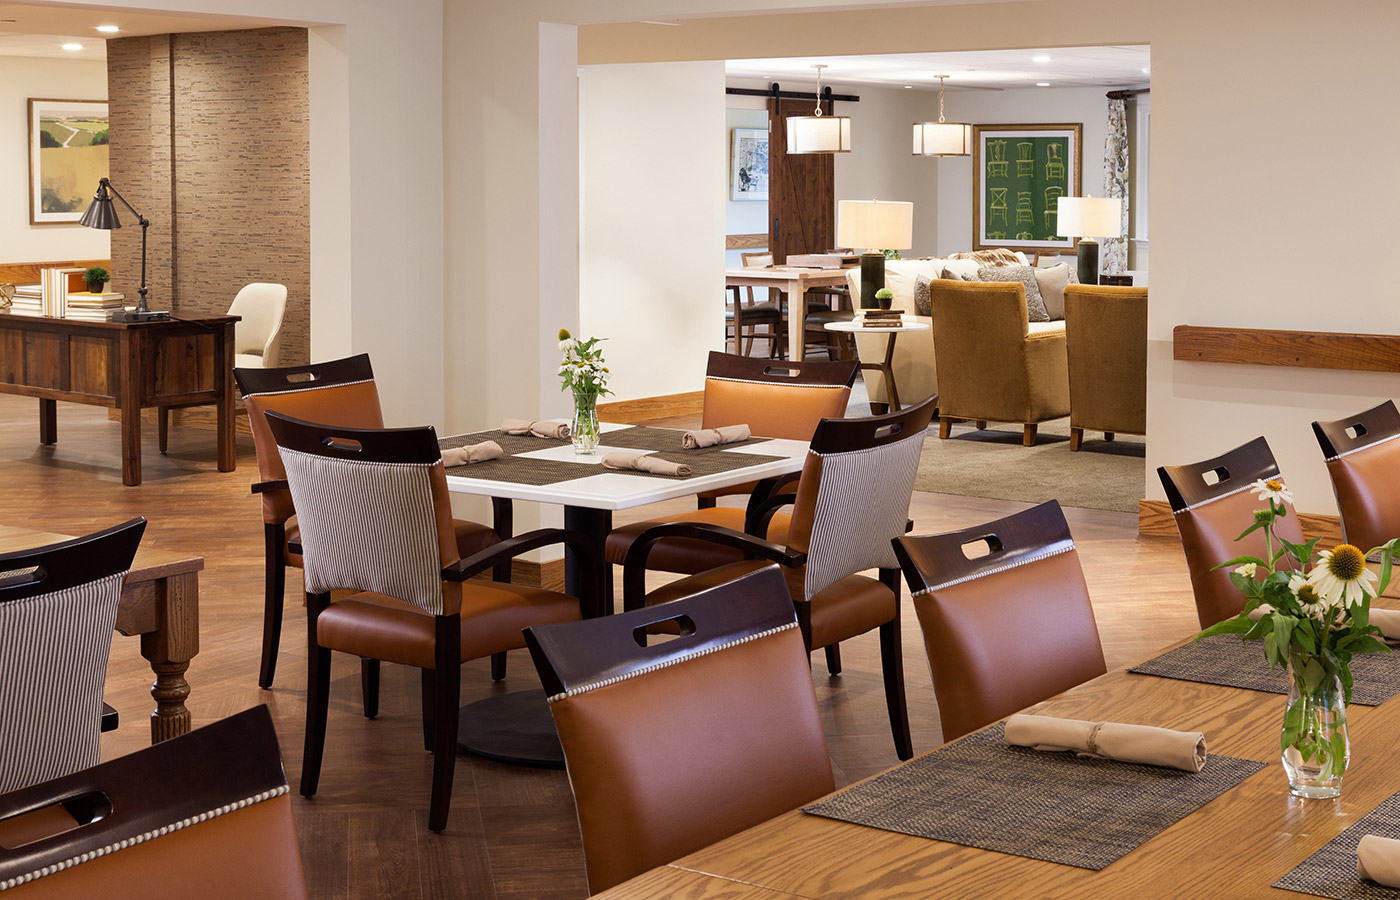 A dining area at The Watermark at East Hill.